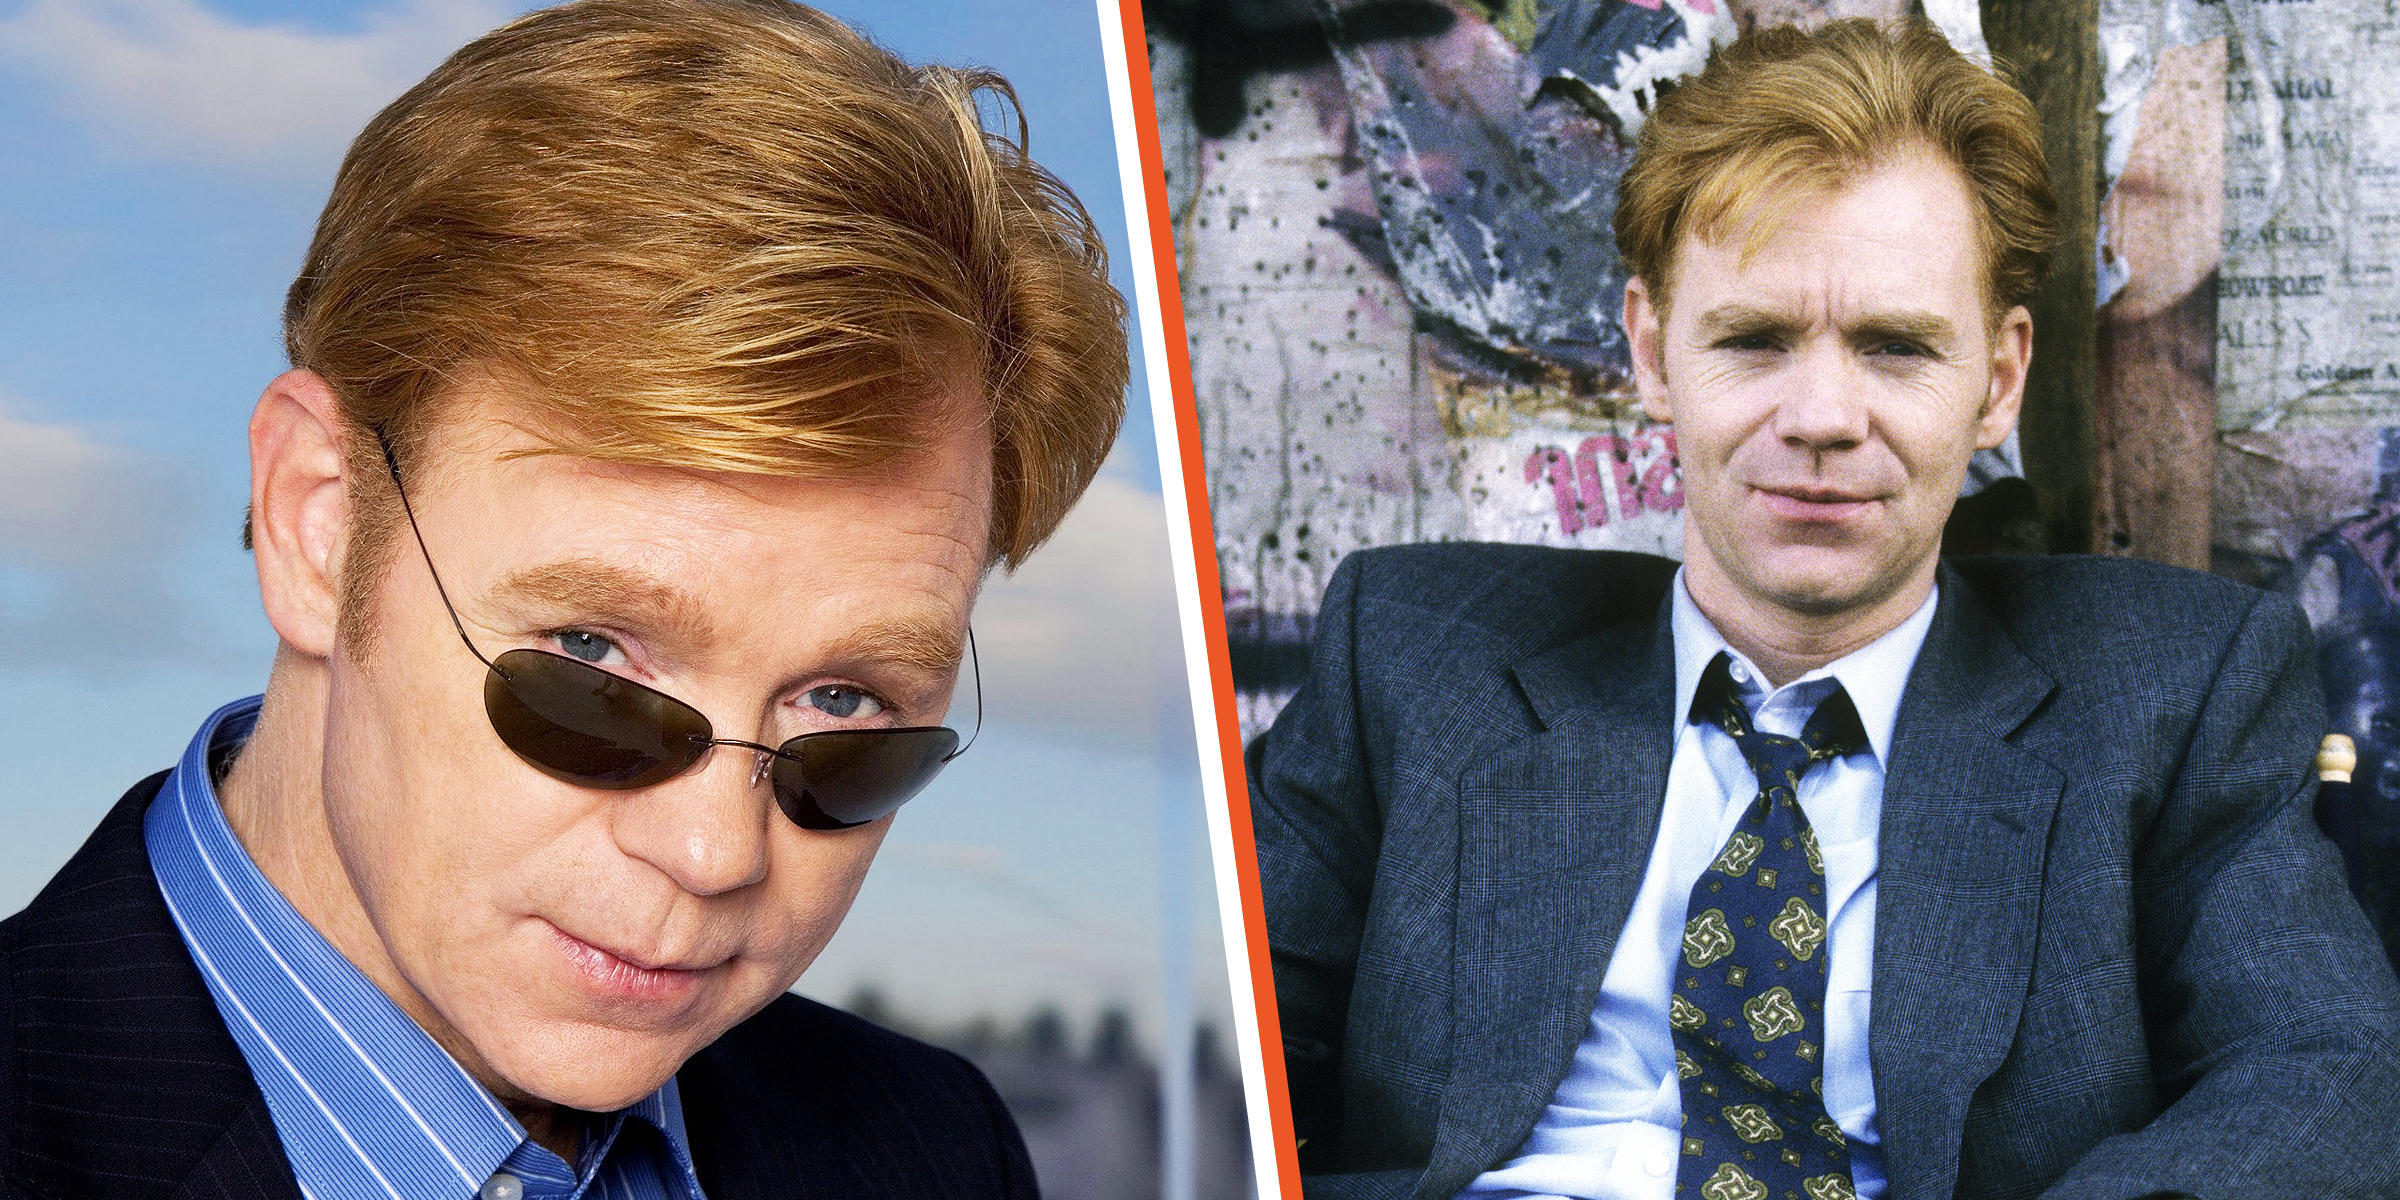 David Caruso | Source: Getty Images